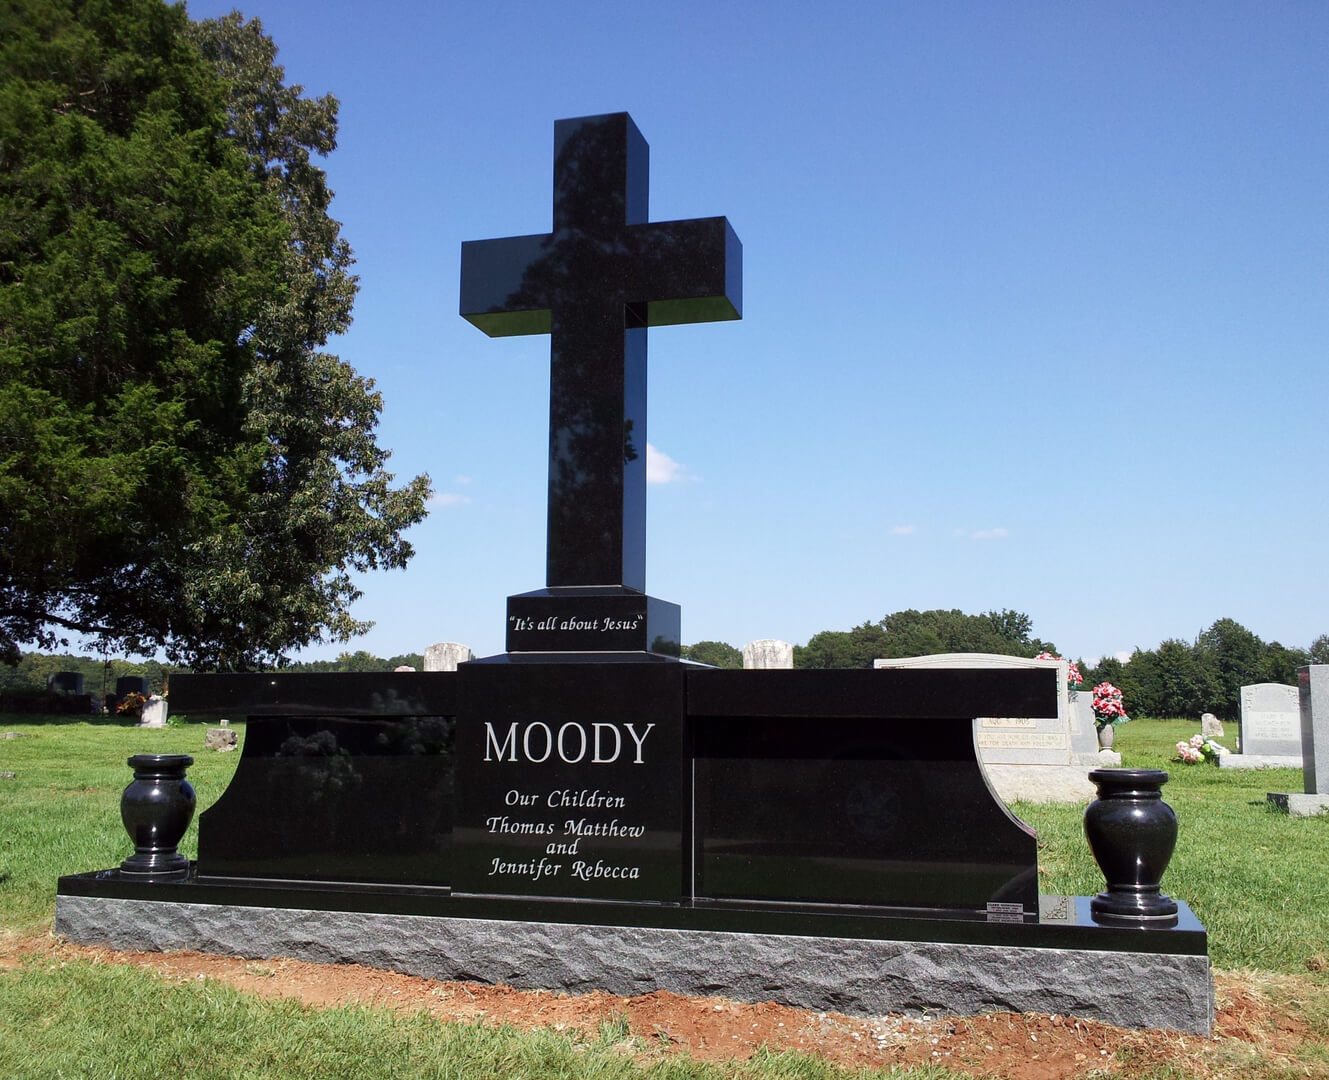 A cross shaped memorial slab with the name Moody